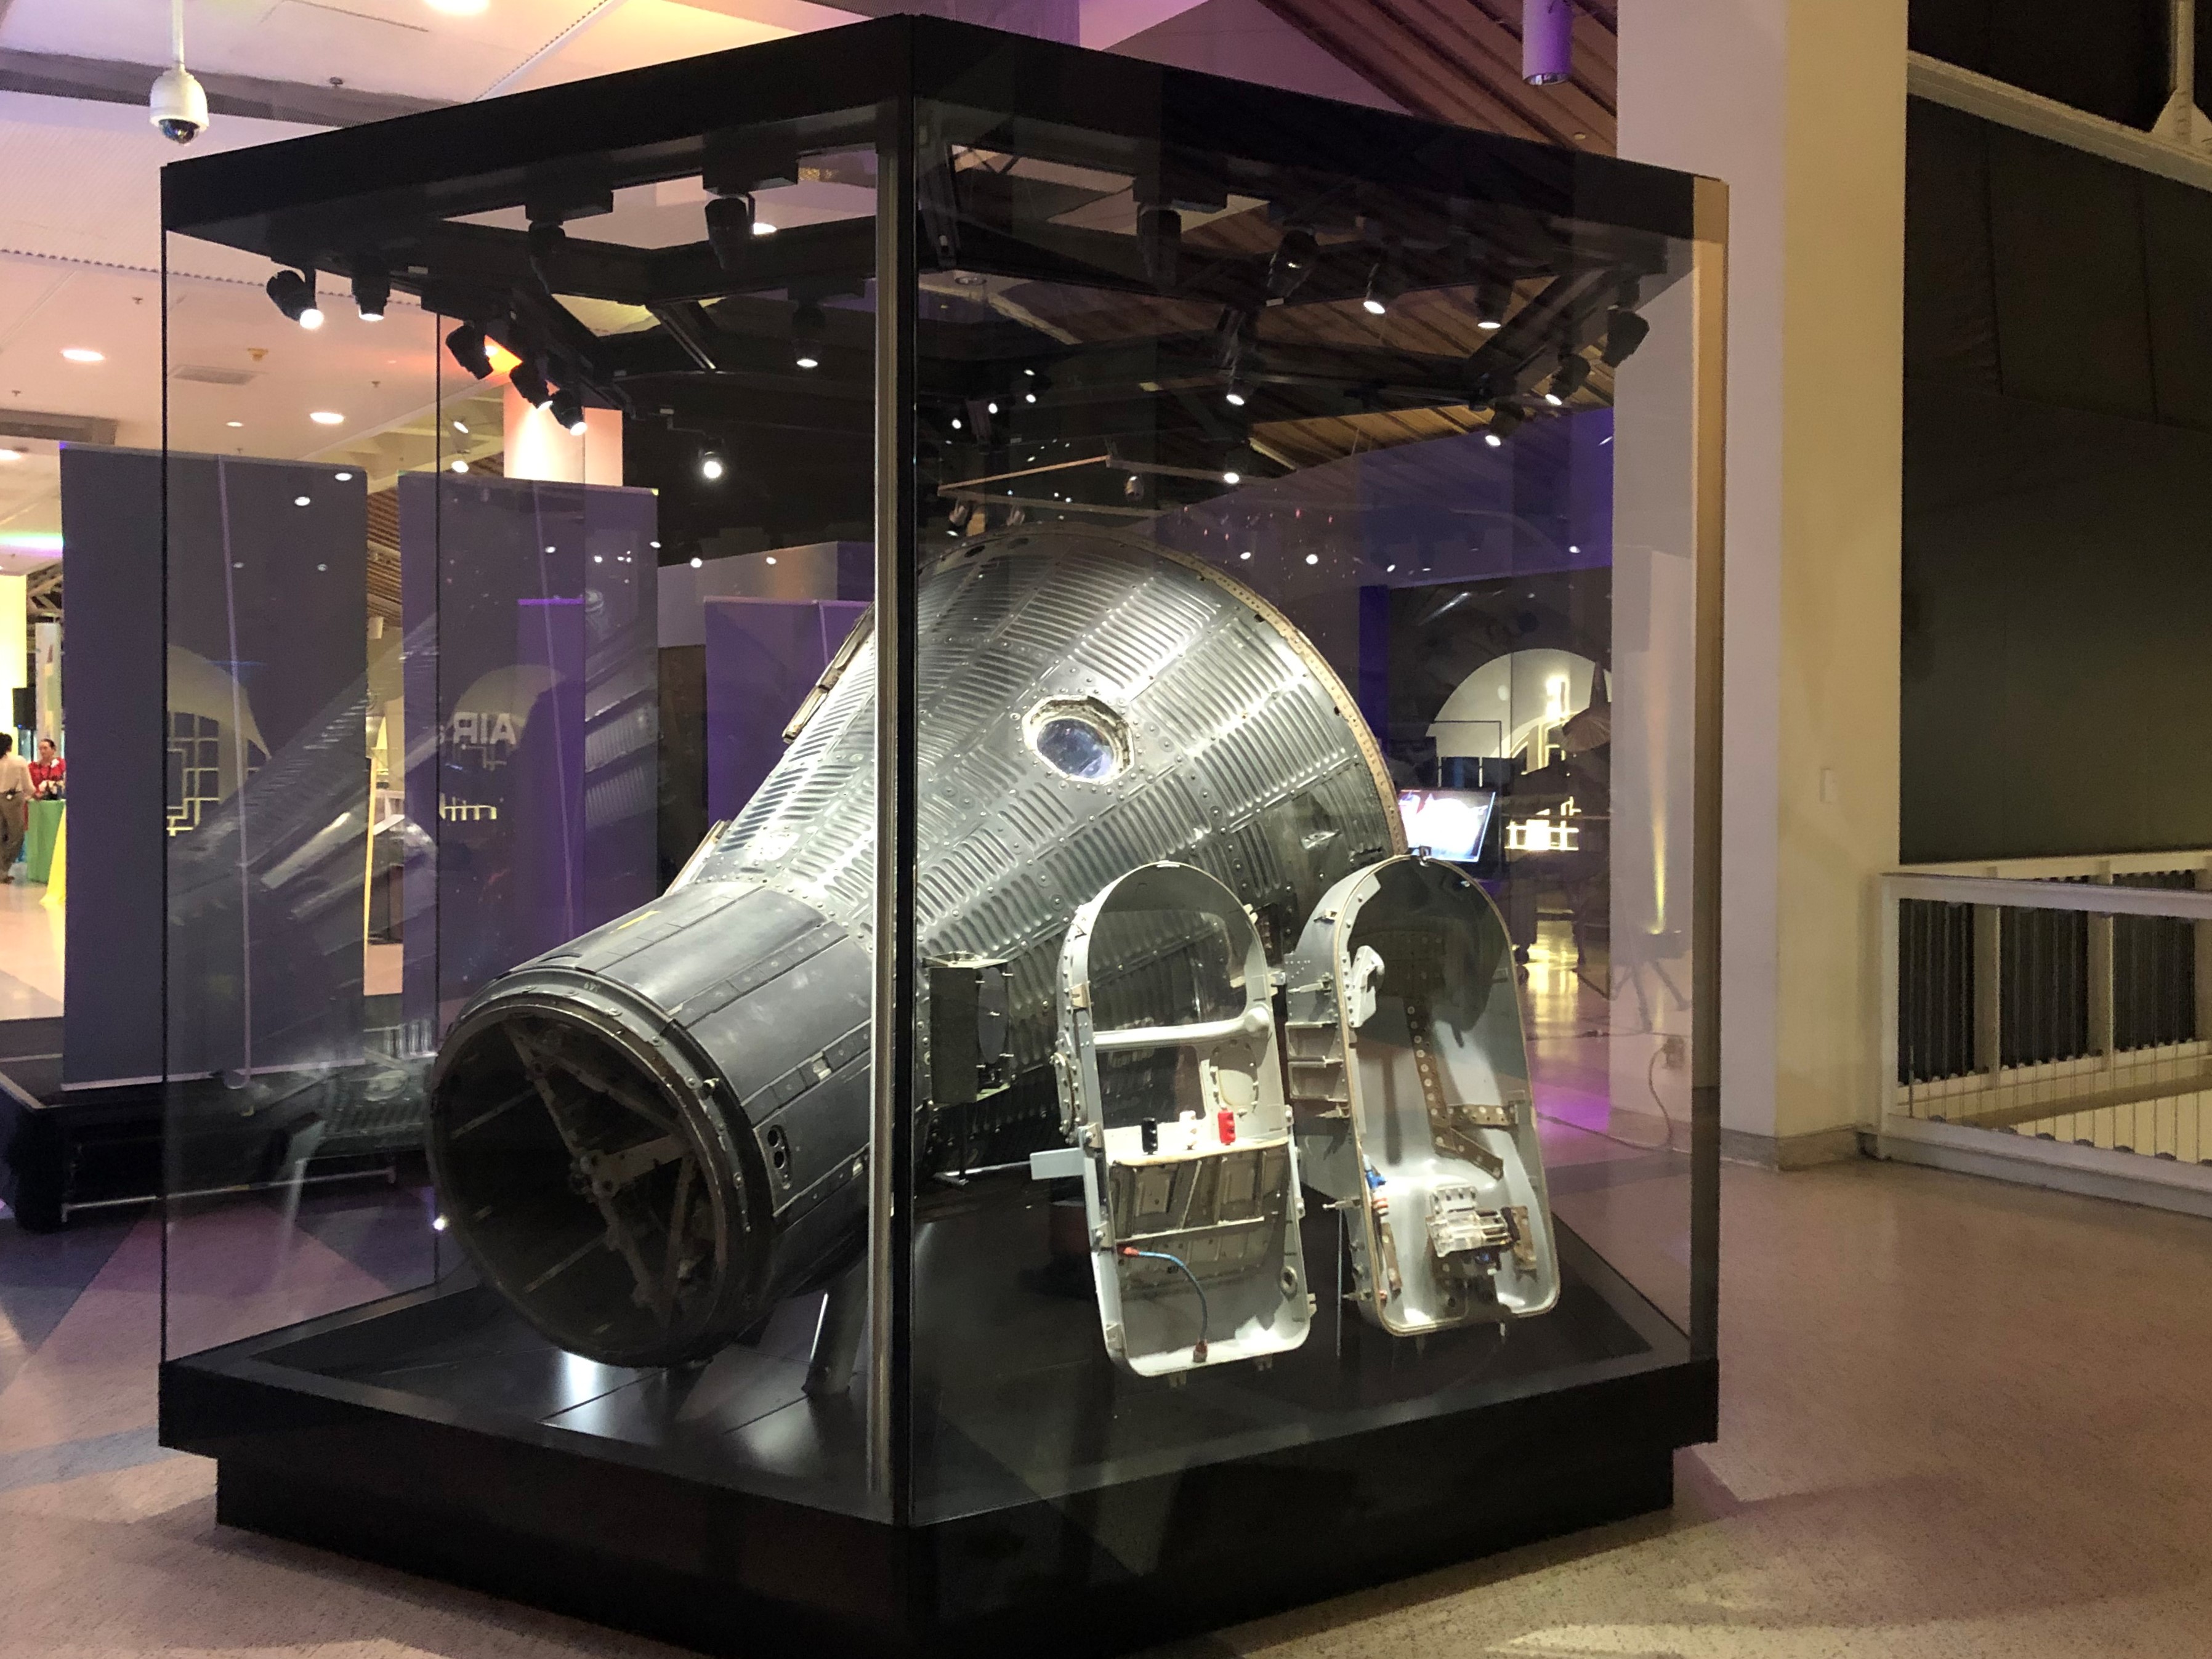 Mercury-Redstone 2 capsule and chimpanzee flight couch on display at the California Science Center